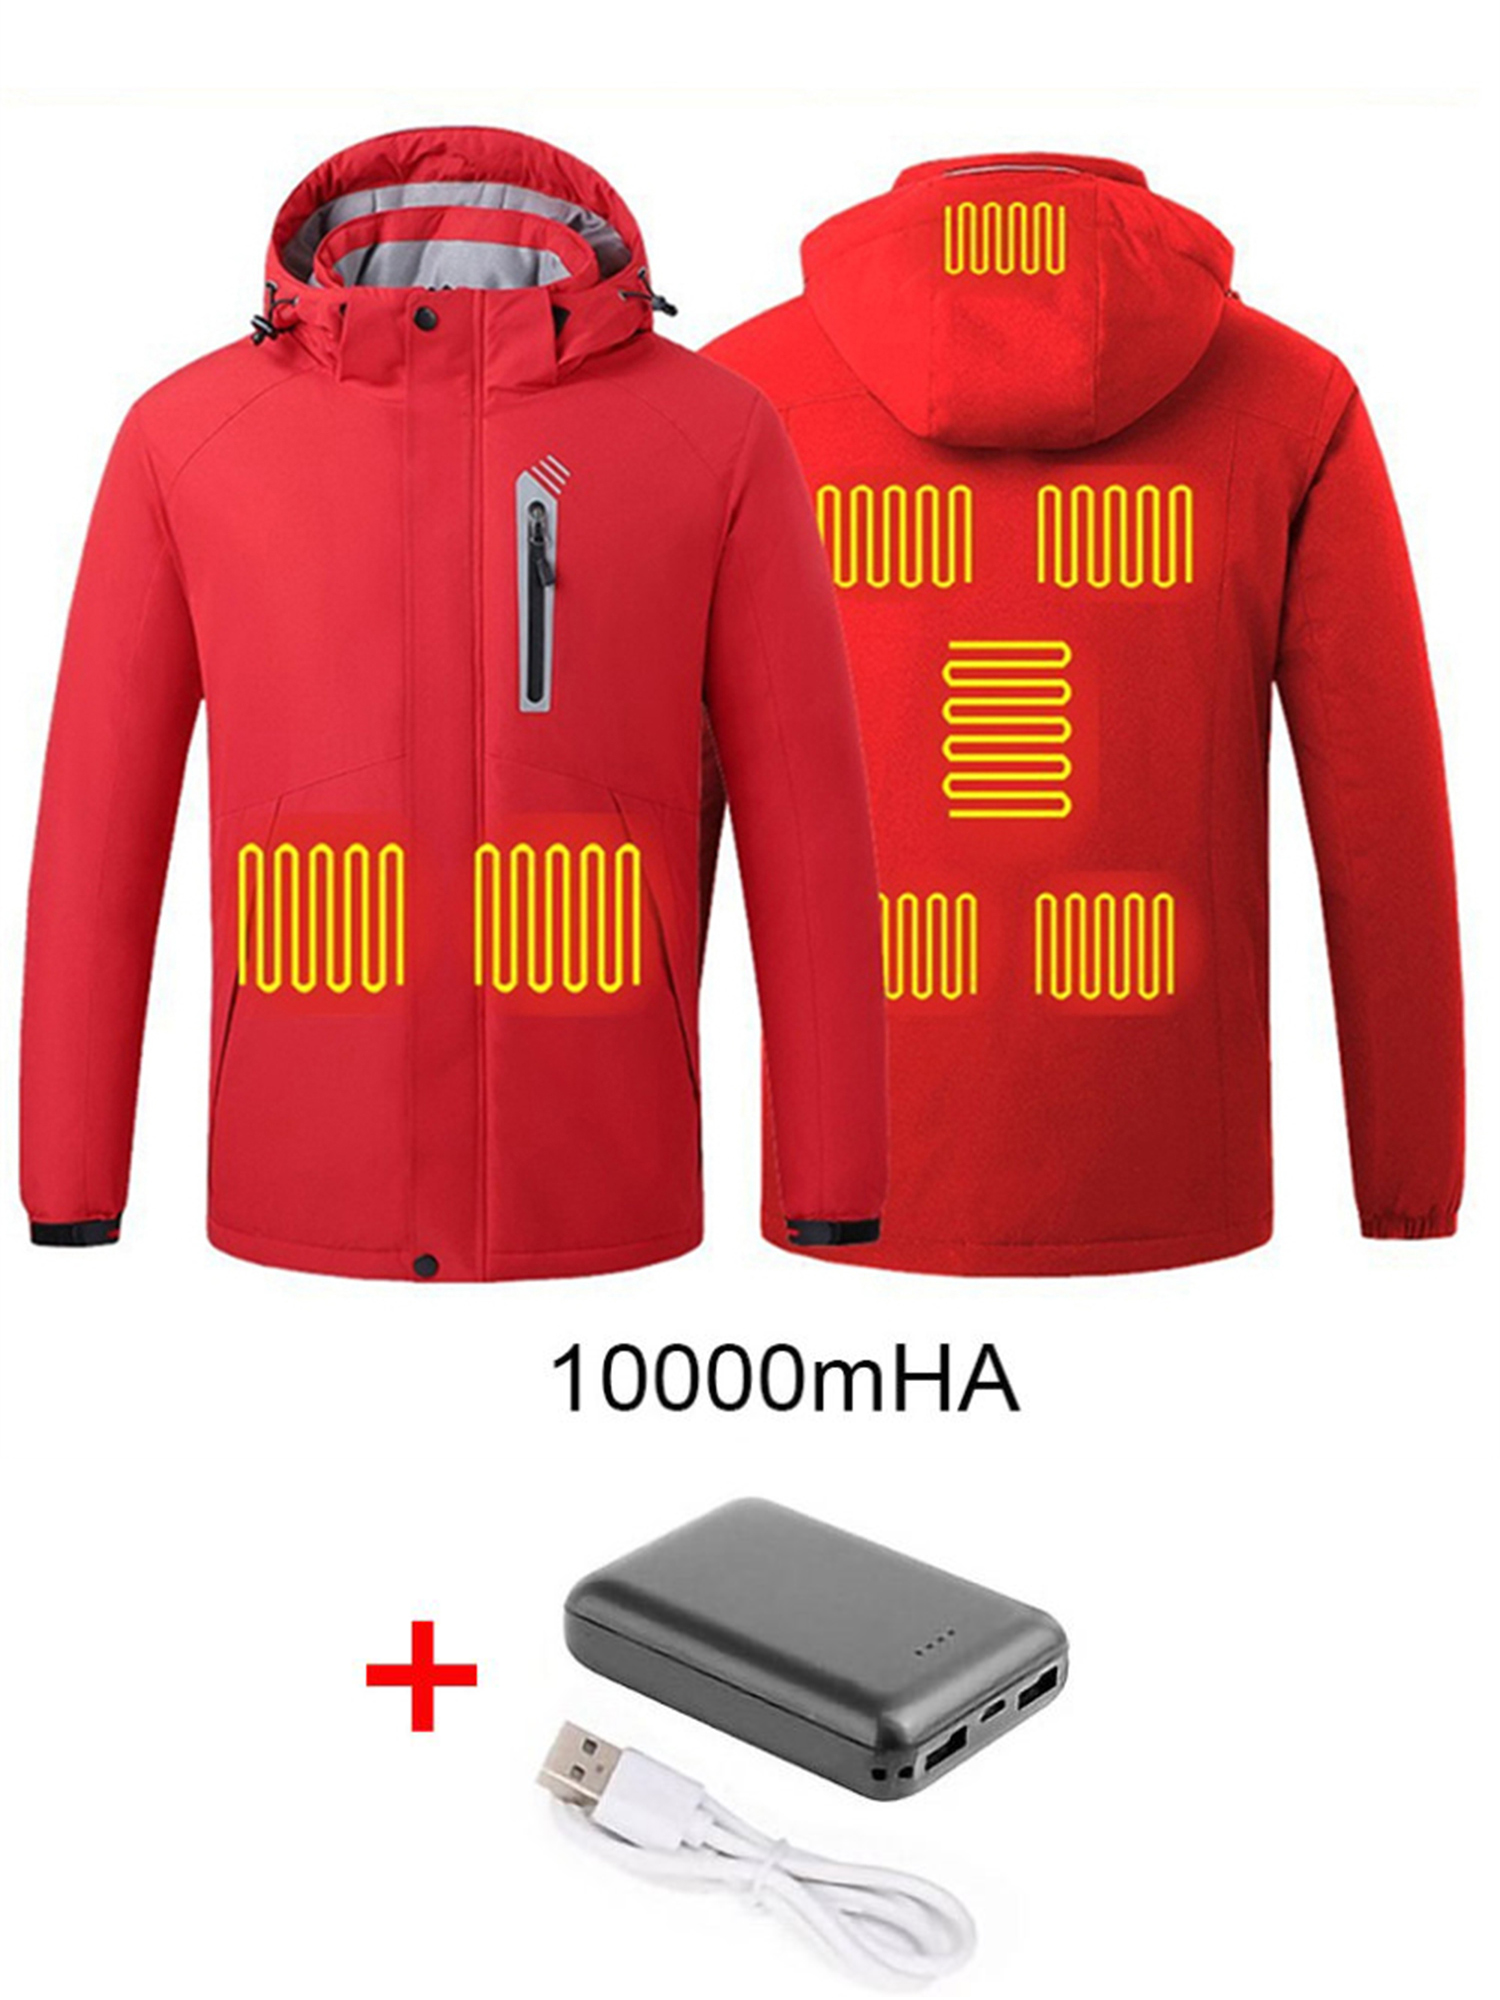 UKAP Mens Electric Heated Jacket with Detachable Hood (Battery Included) Washable Unisex Winter Body Warmer Women Heating Coat Clothing - image 1 of 3